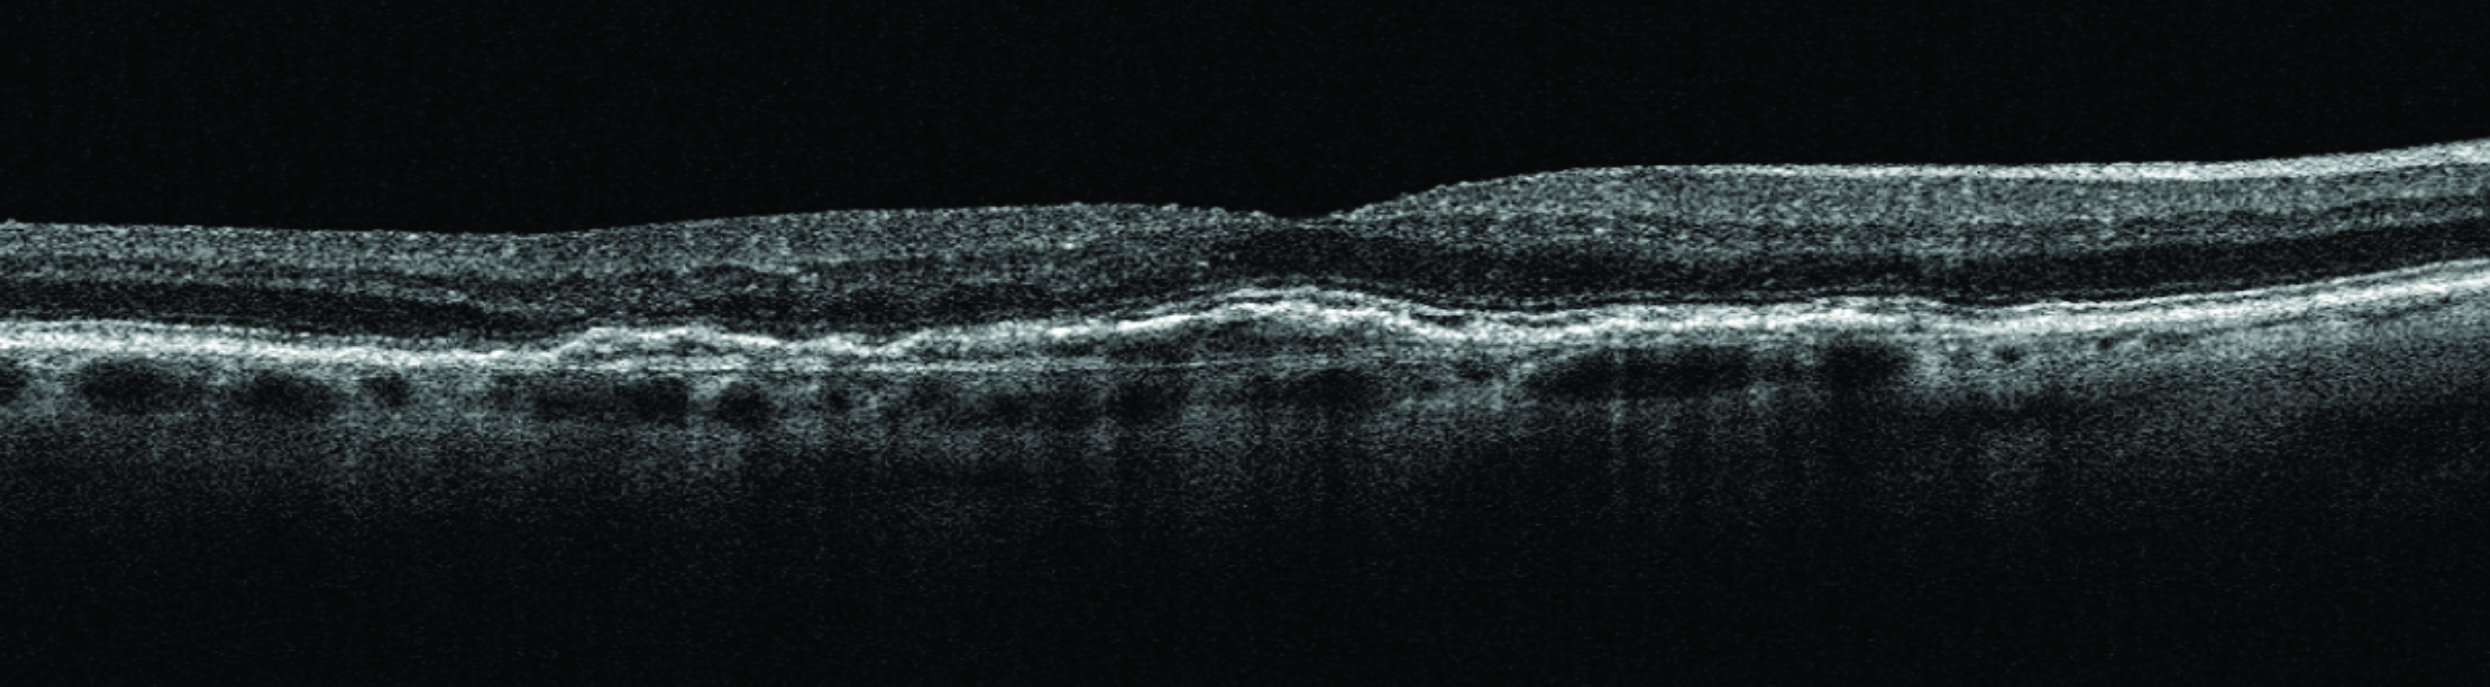 SD-OCT imaging shows the highest rate of progression was in eyes with the double layer sign, while shallow irregular RPE elevation—a derivative of DLS—does not increase hazard of progression.